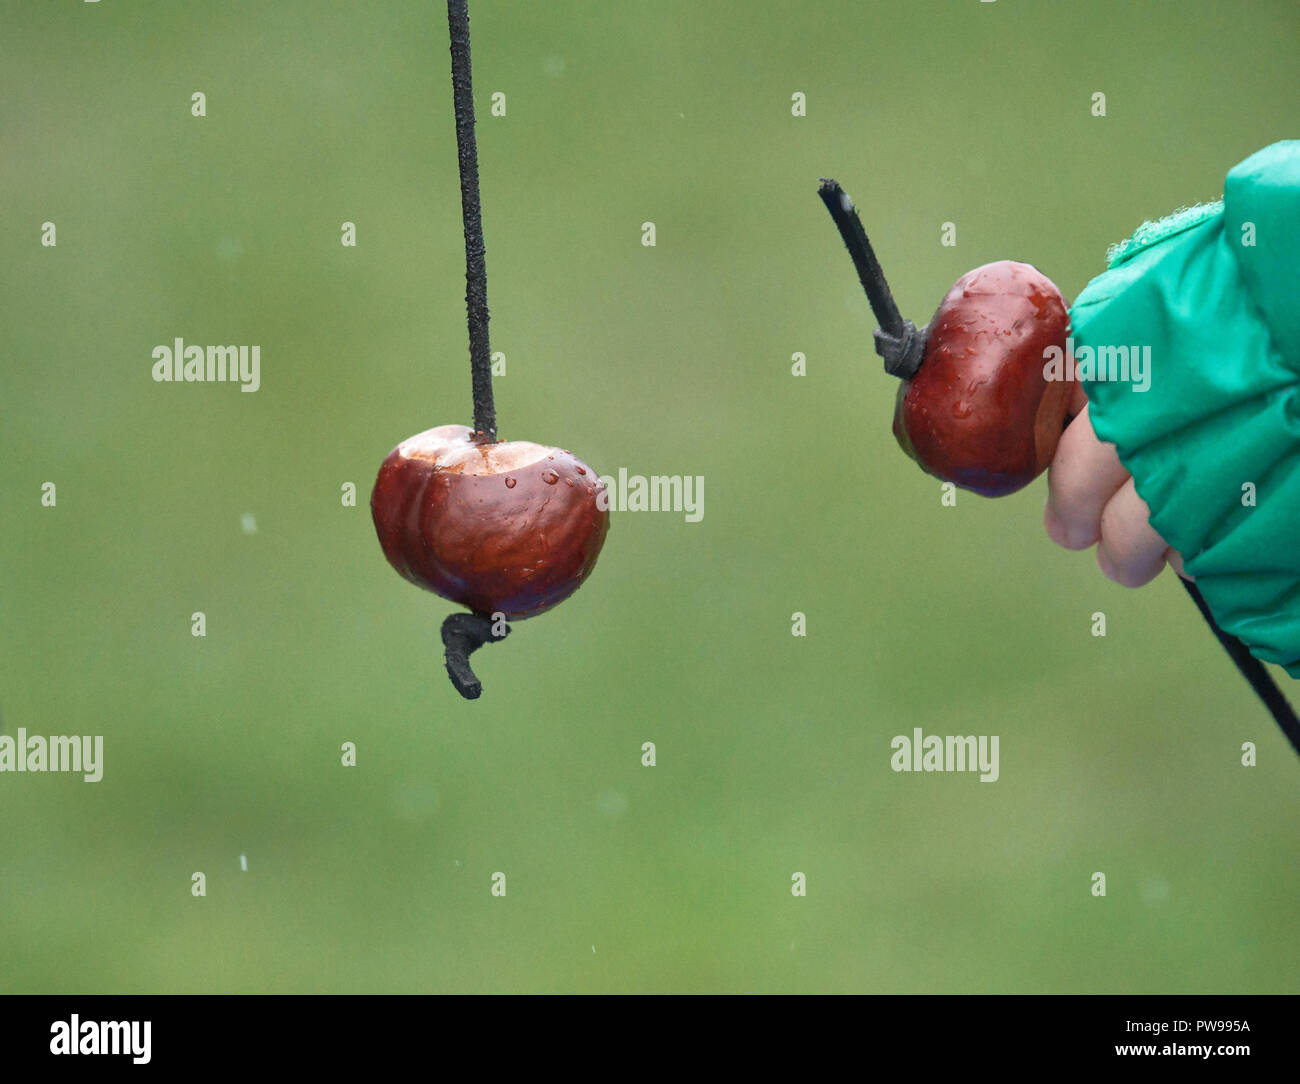 Southwick, UK. 14th October 2018. Sizing up a conker on a very rainy day at Southwick, East Midlands, England, 14th October 2018, for the 2018 junior world conker championships. Credit: Michael Foley/Alamy Live News Stock Photo